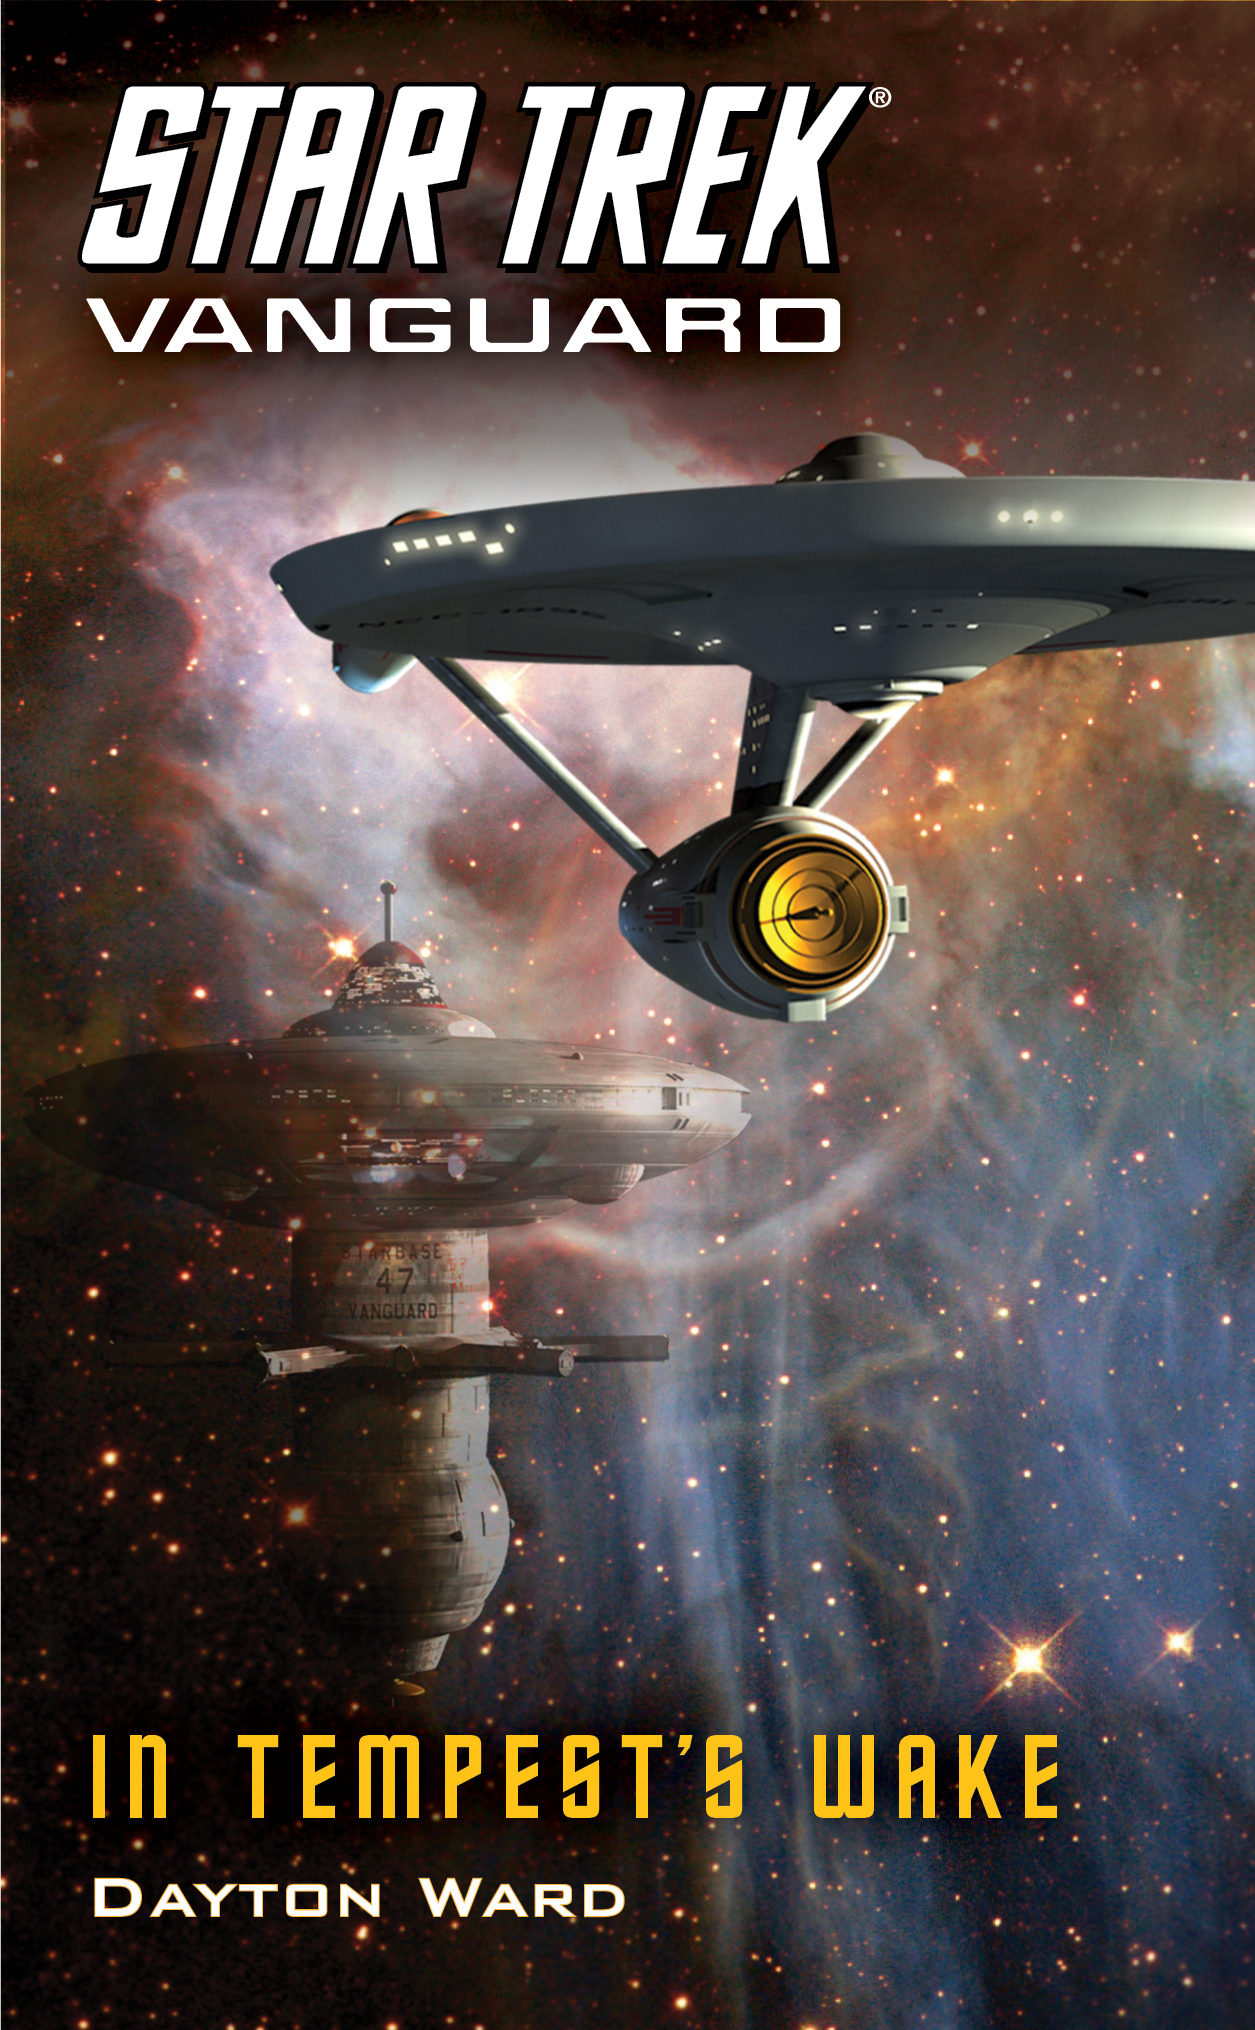 “Star Trek: Vanguard: In Tempest’s Wake” Review by Myconfinedspace.com